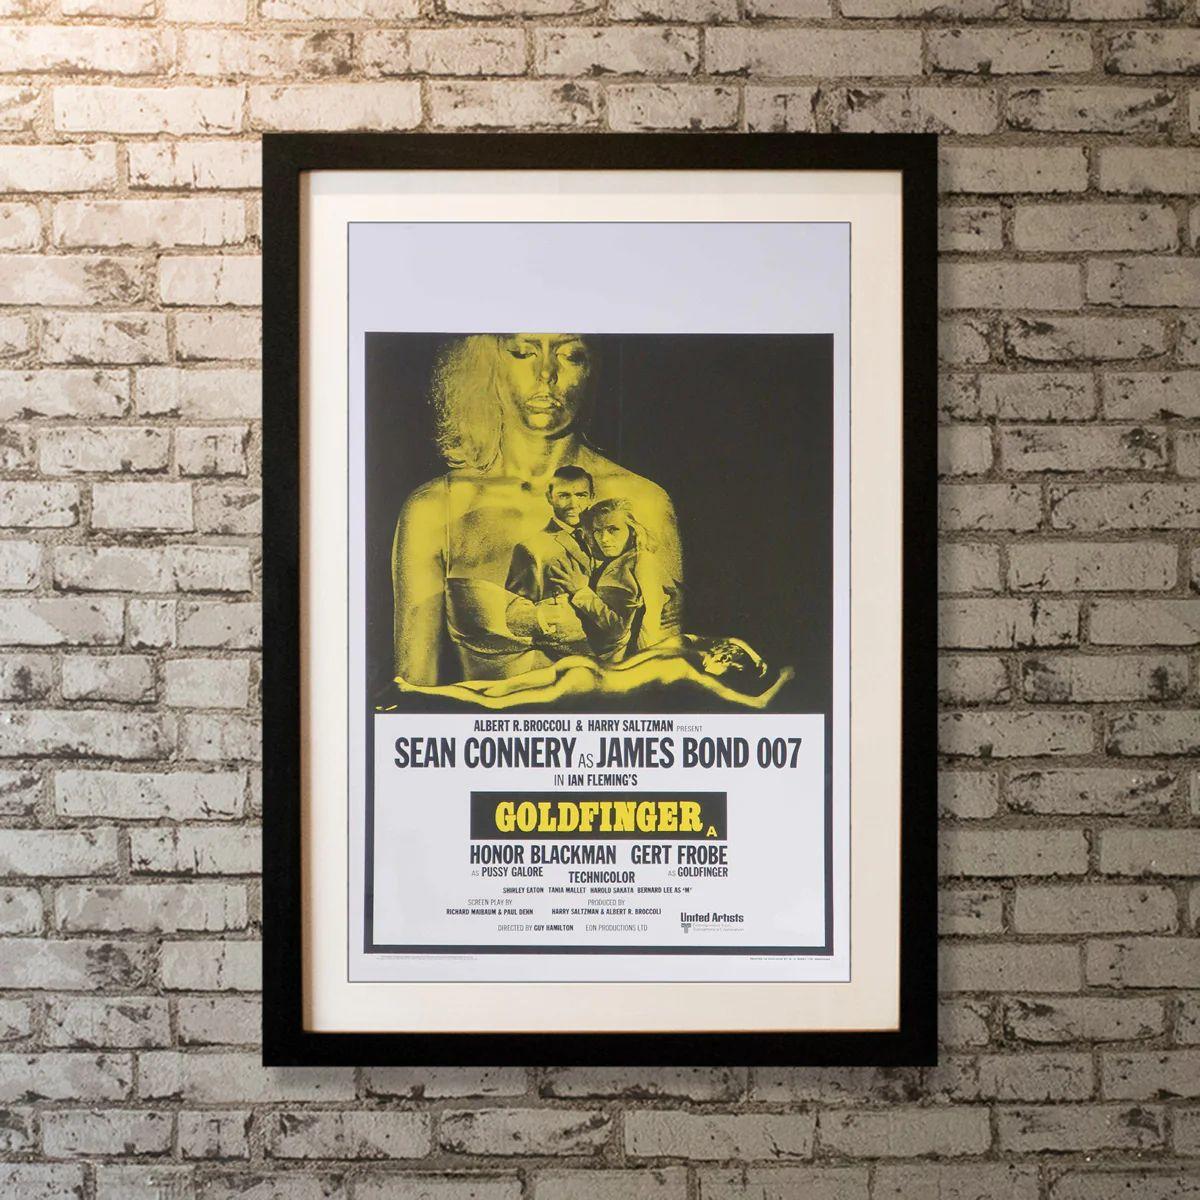 Goldfinger, Unframed Poster, 1969R

Double Crown (20 X 30 Inches). While investigating a gold magnate's smuggling, James Bond uncovers a plot to contaminate the Fort Knox gold reserve.

Additional Information:
Year: 1969 Re-release
Nationality: